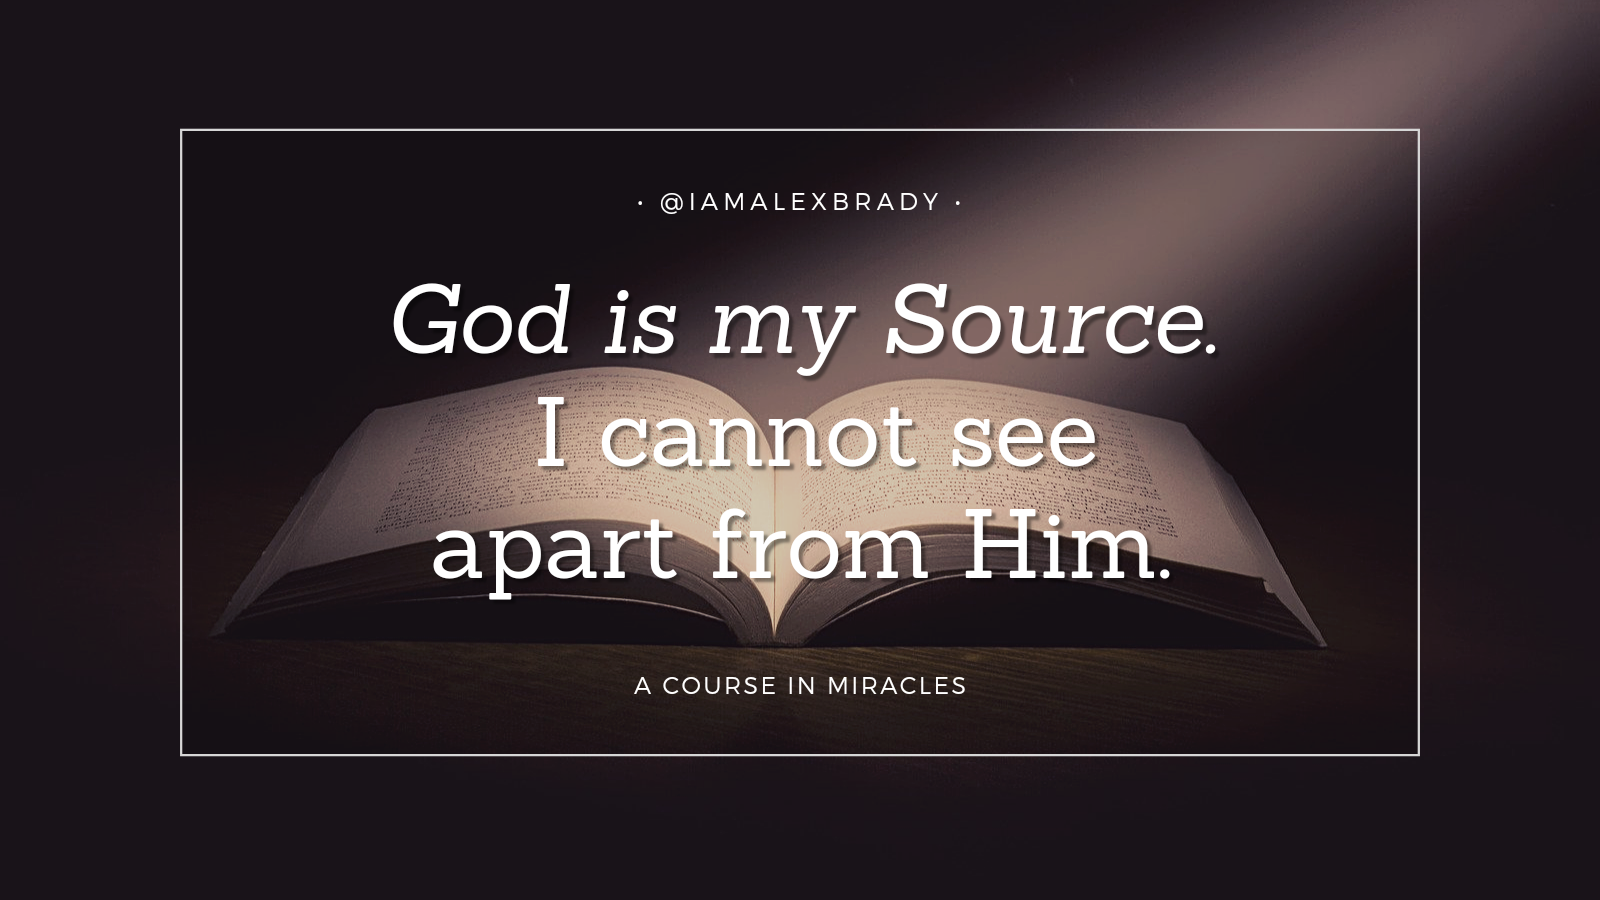 god is my source. i cannot see apart form him.